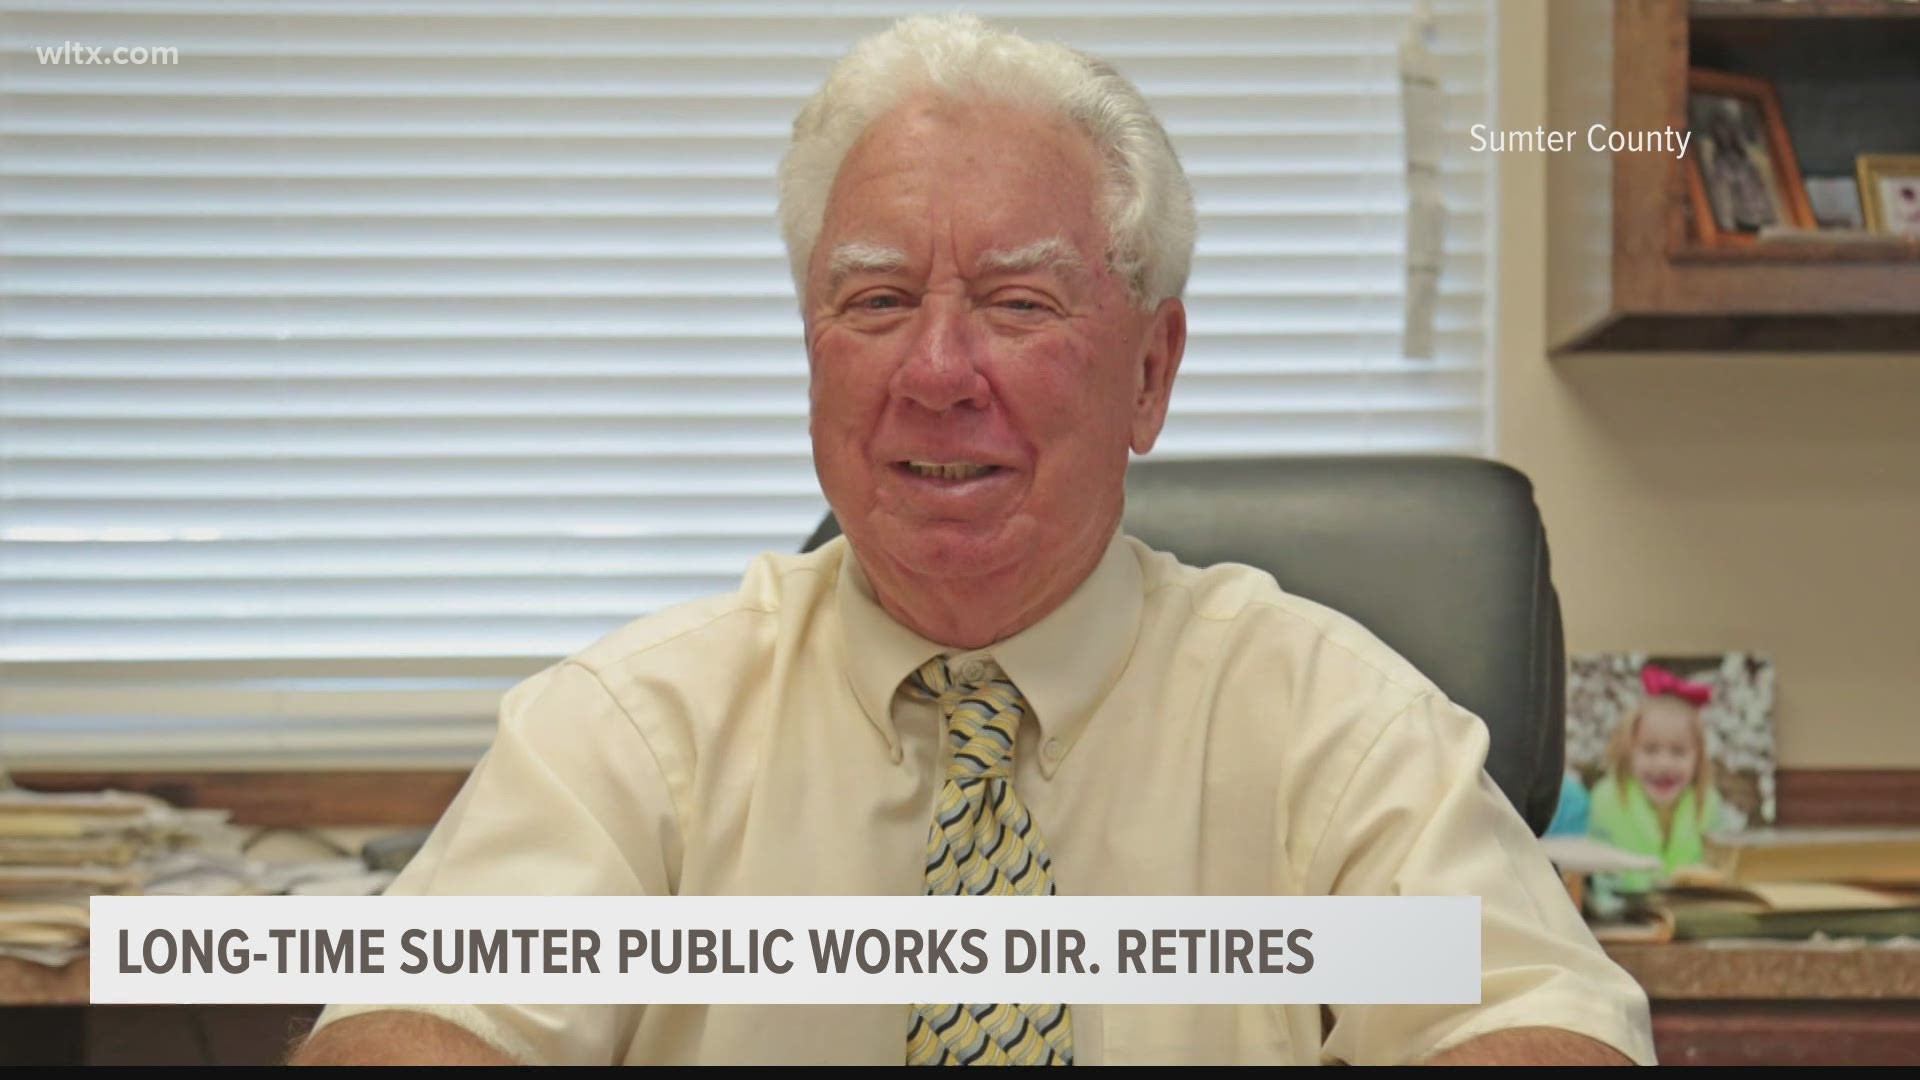 Retiring Eddie Newman said,  "I came to work here when I was 19.. I started out cause I had a real keen thought for building roads and road construction.: